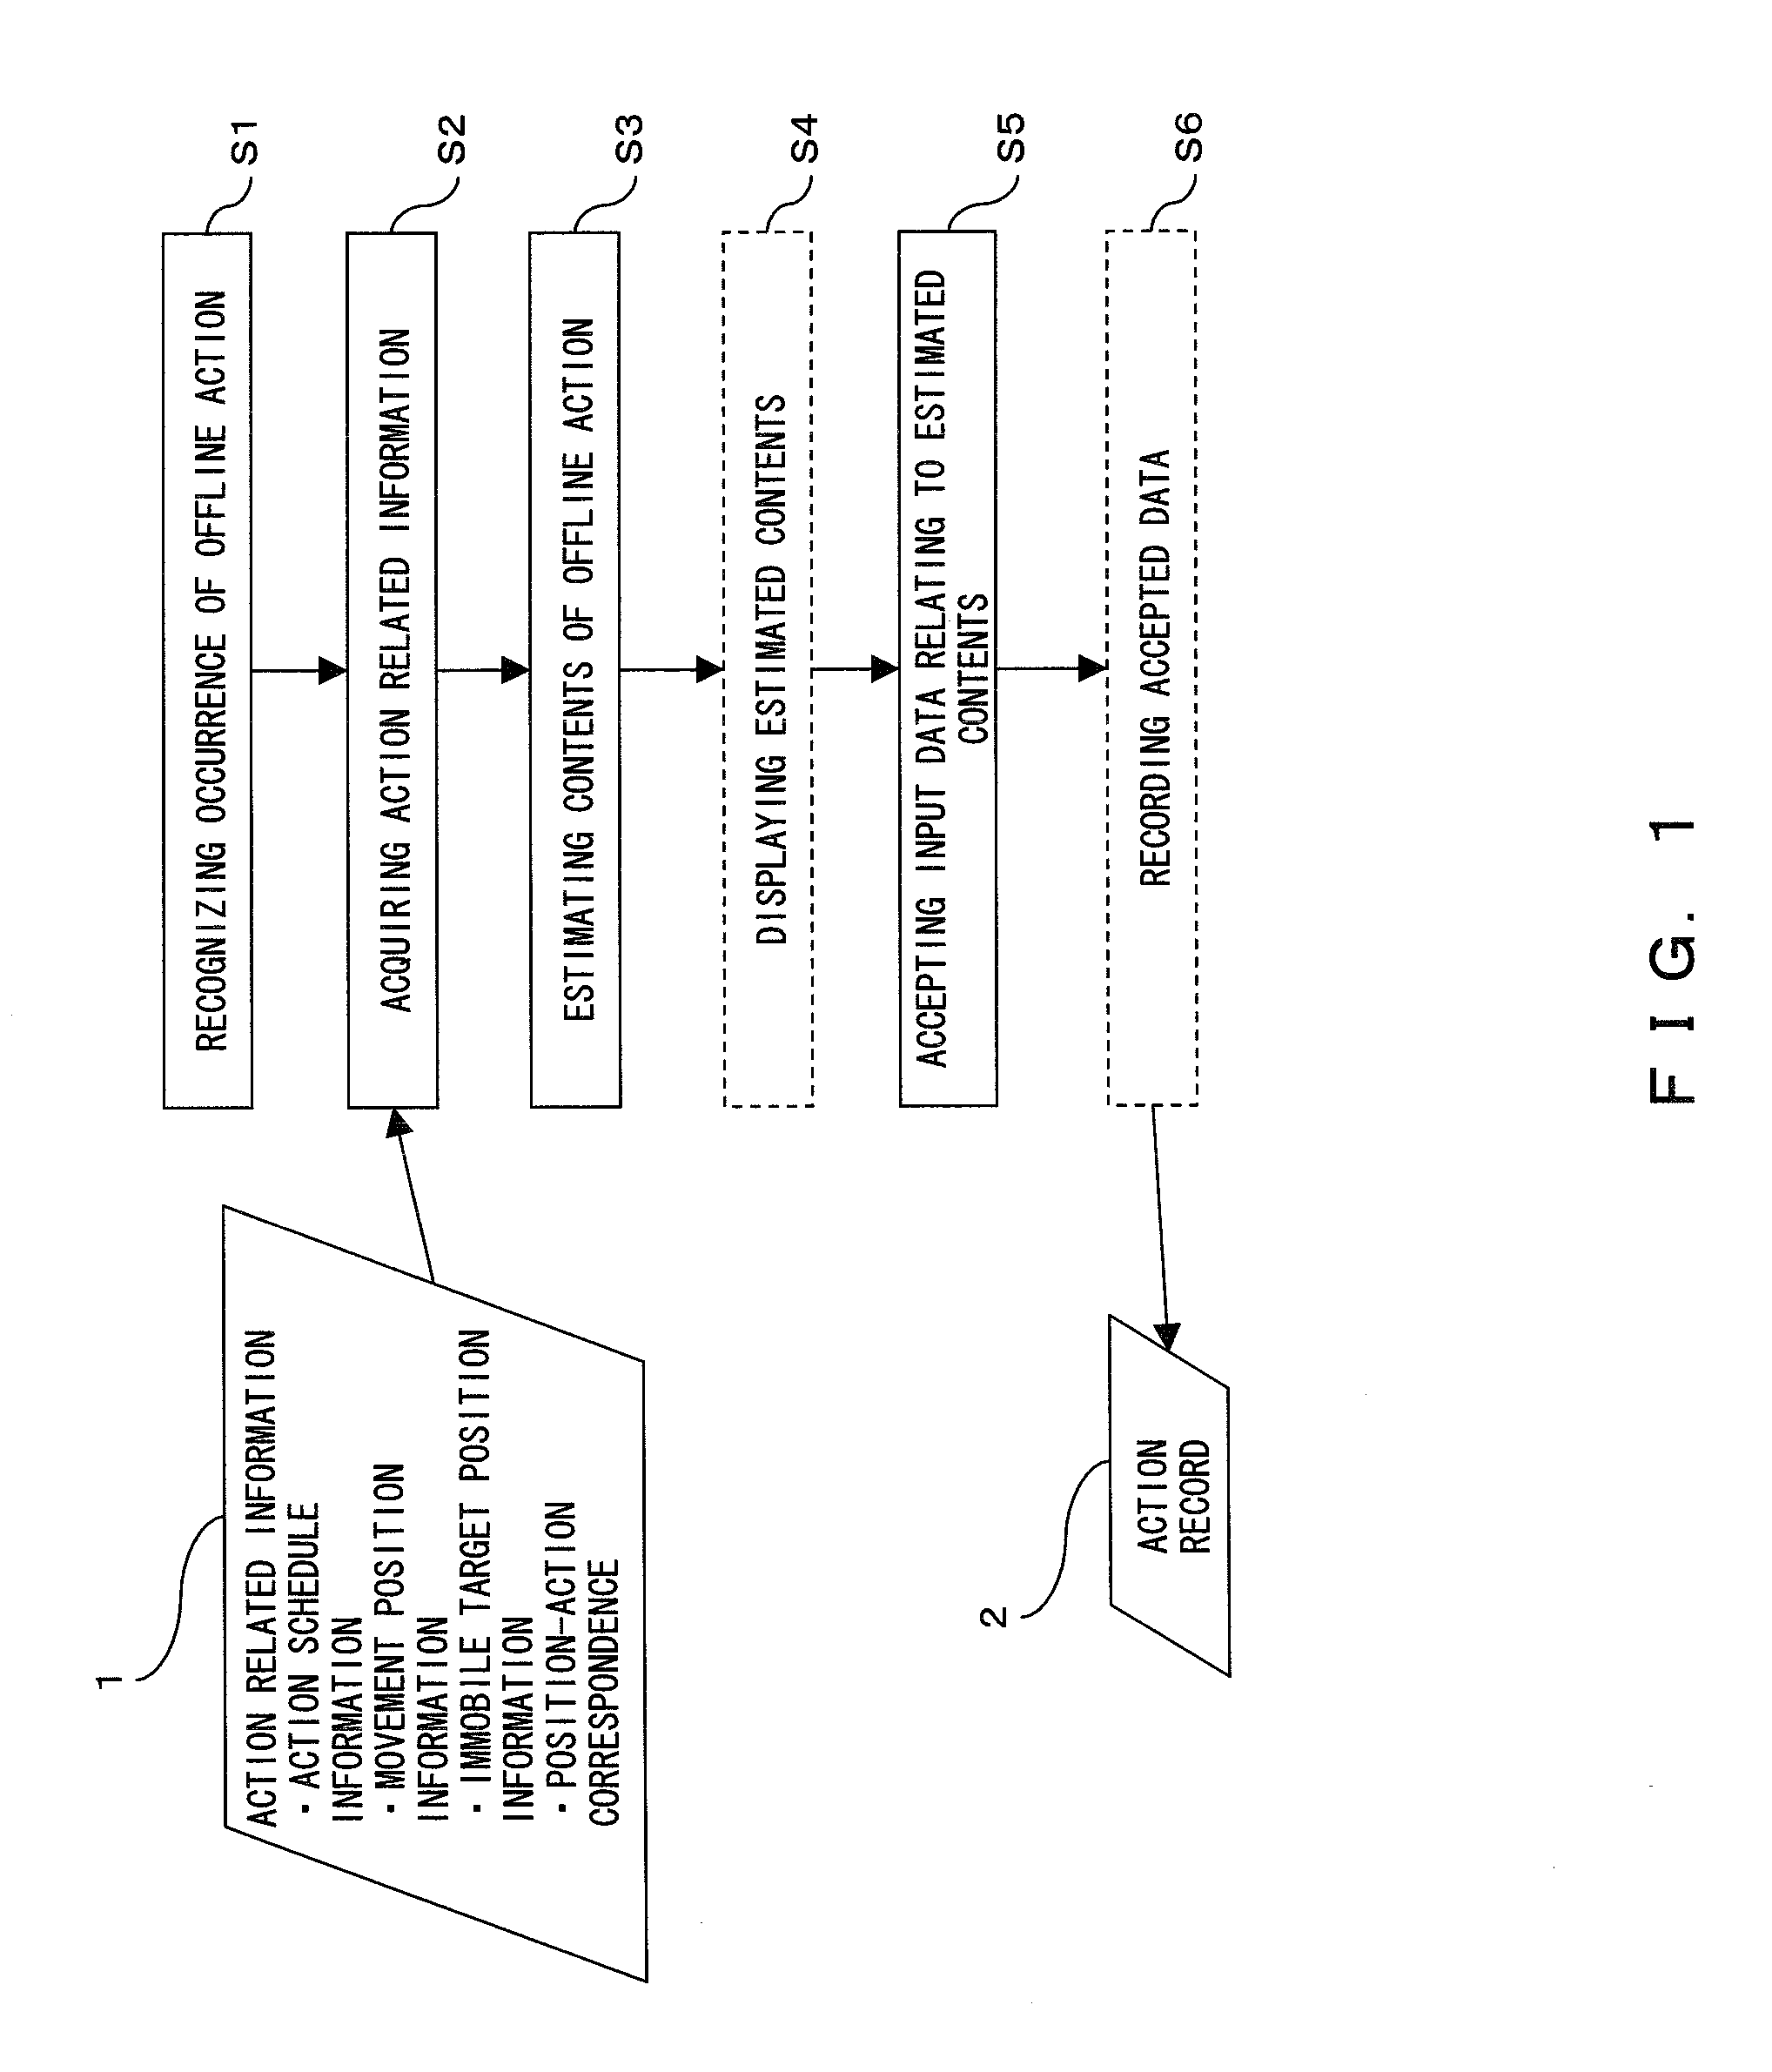 Action record support program, system, device, and method